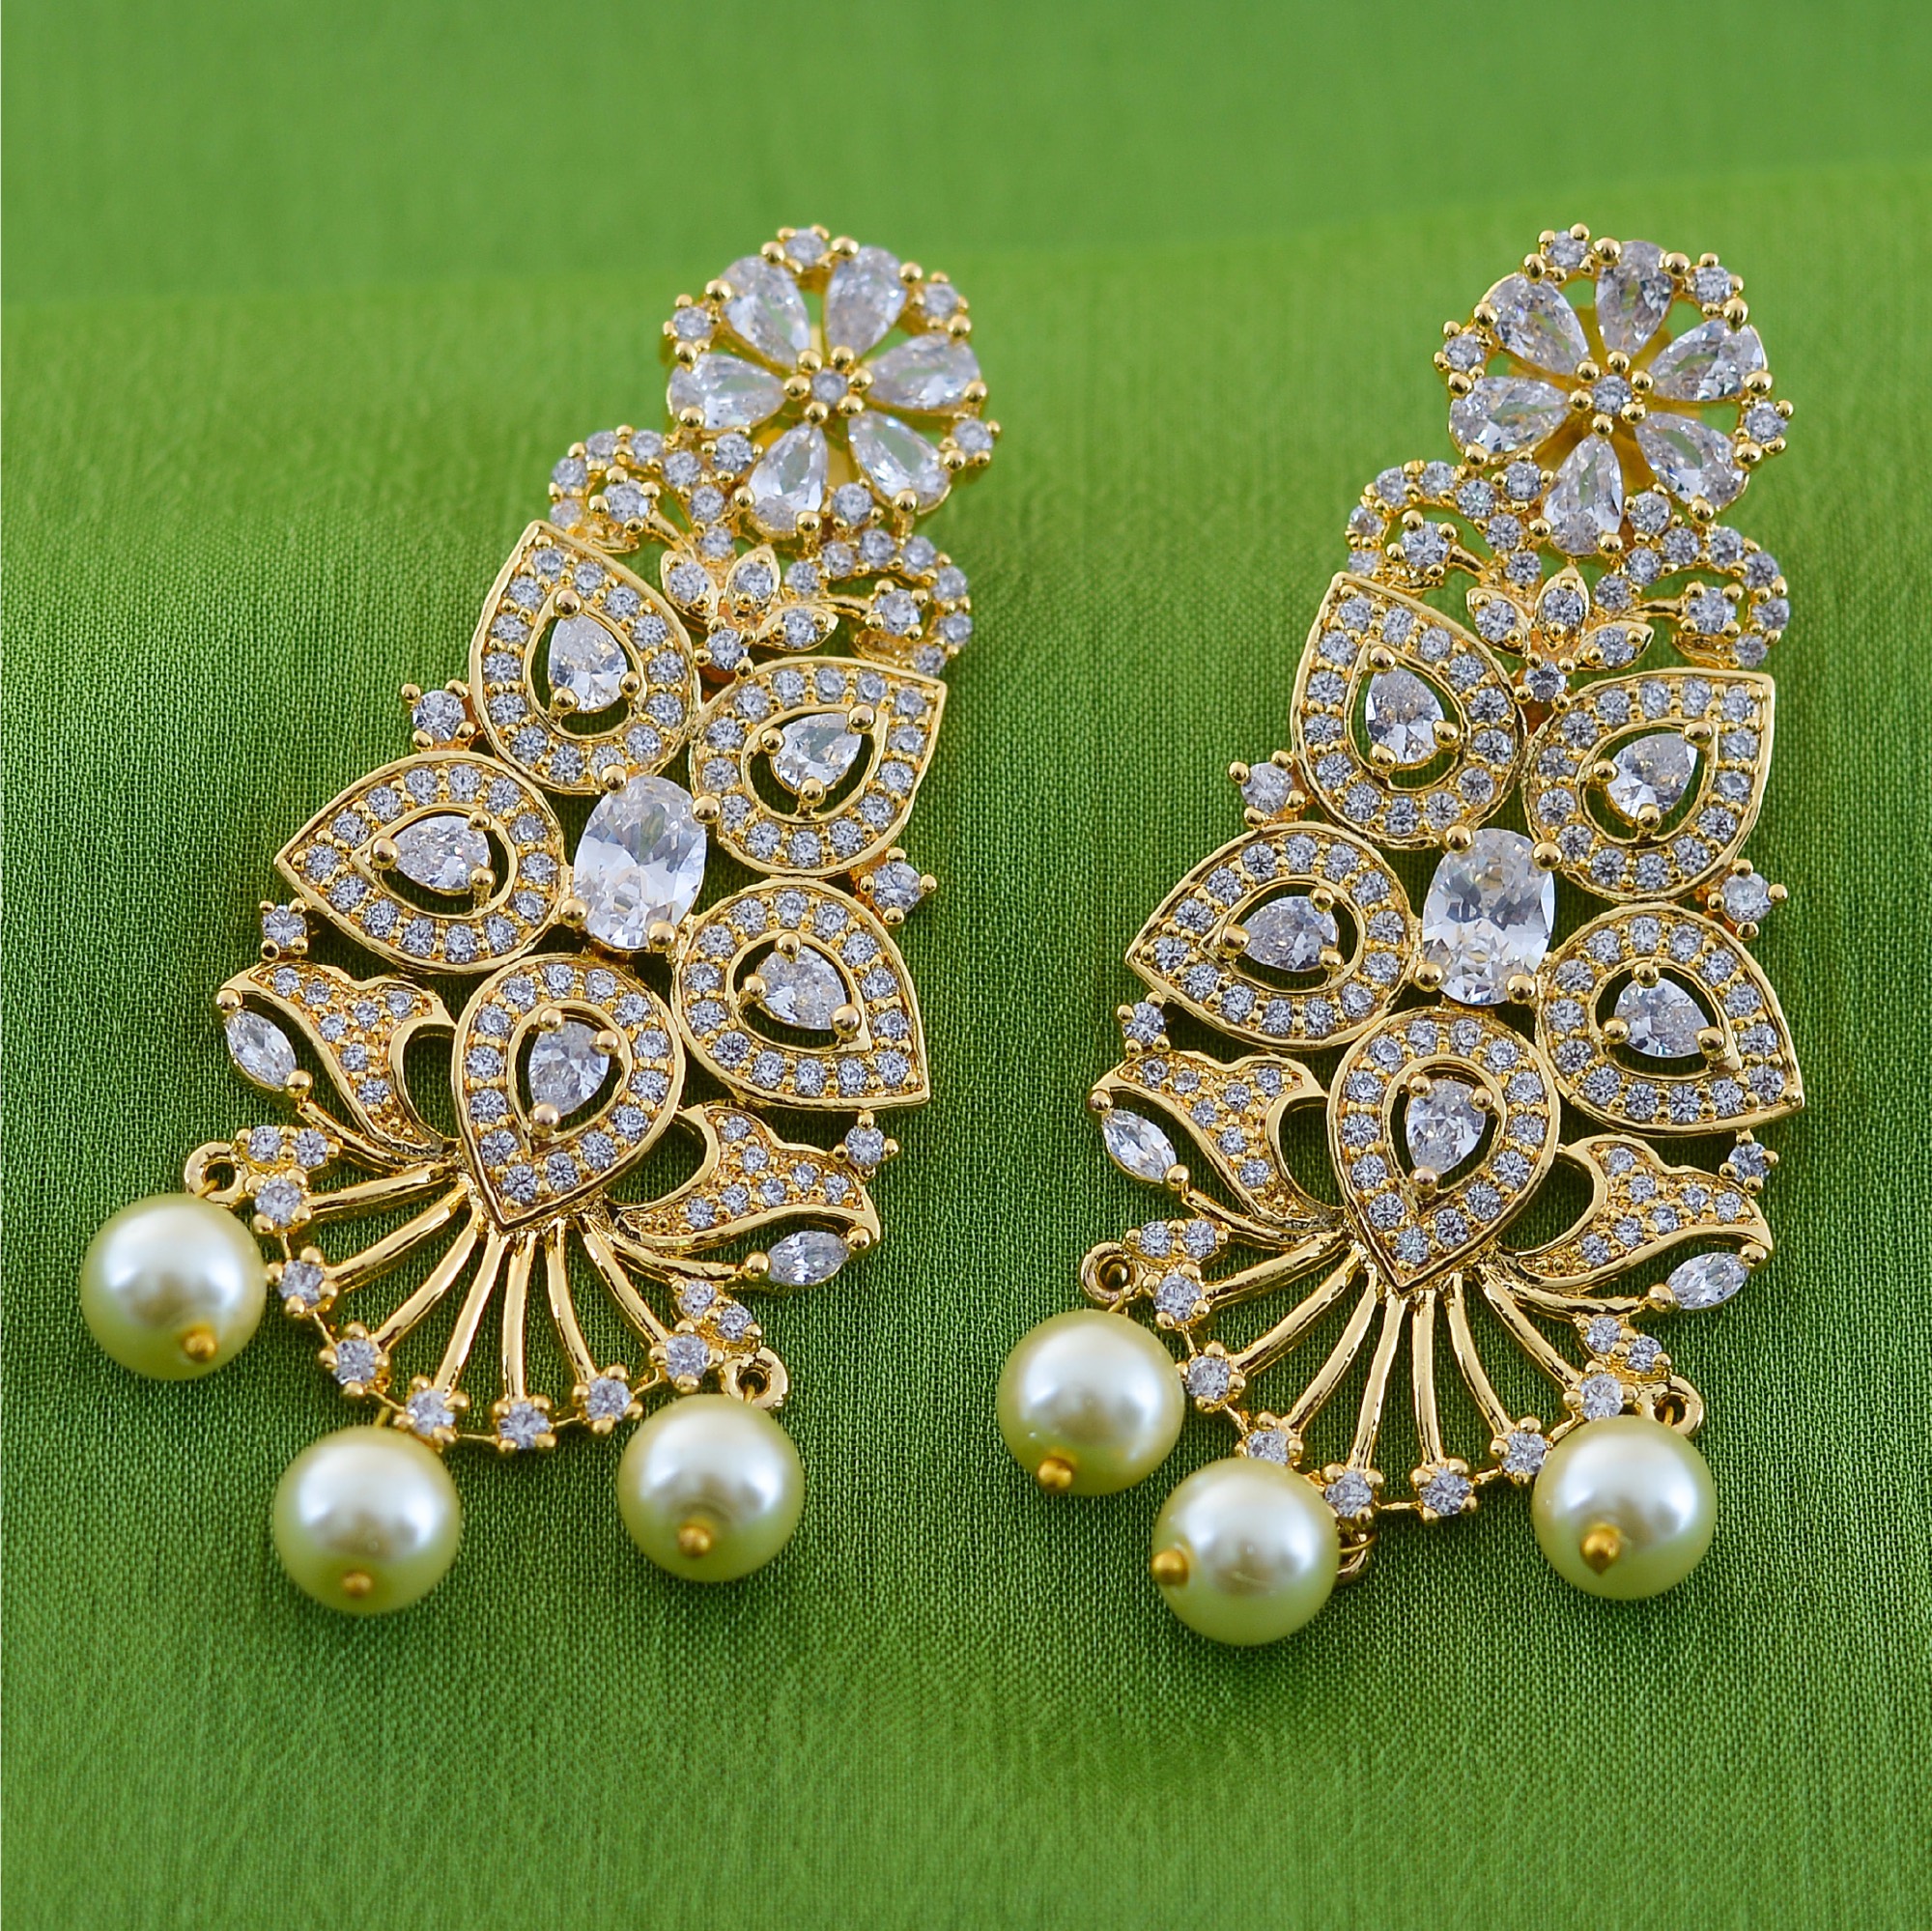 Premium Quality Cz Stone Earring With Flower Designed White Stones  Highlighted Green Stone Earring buy Online